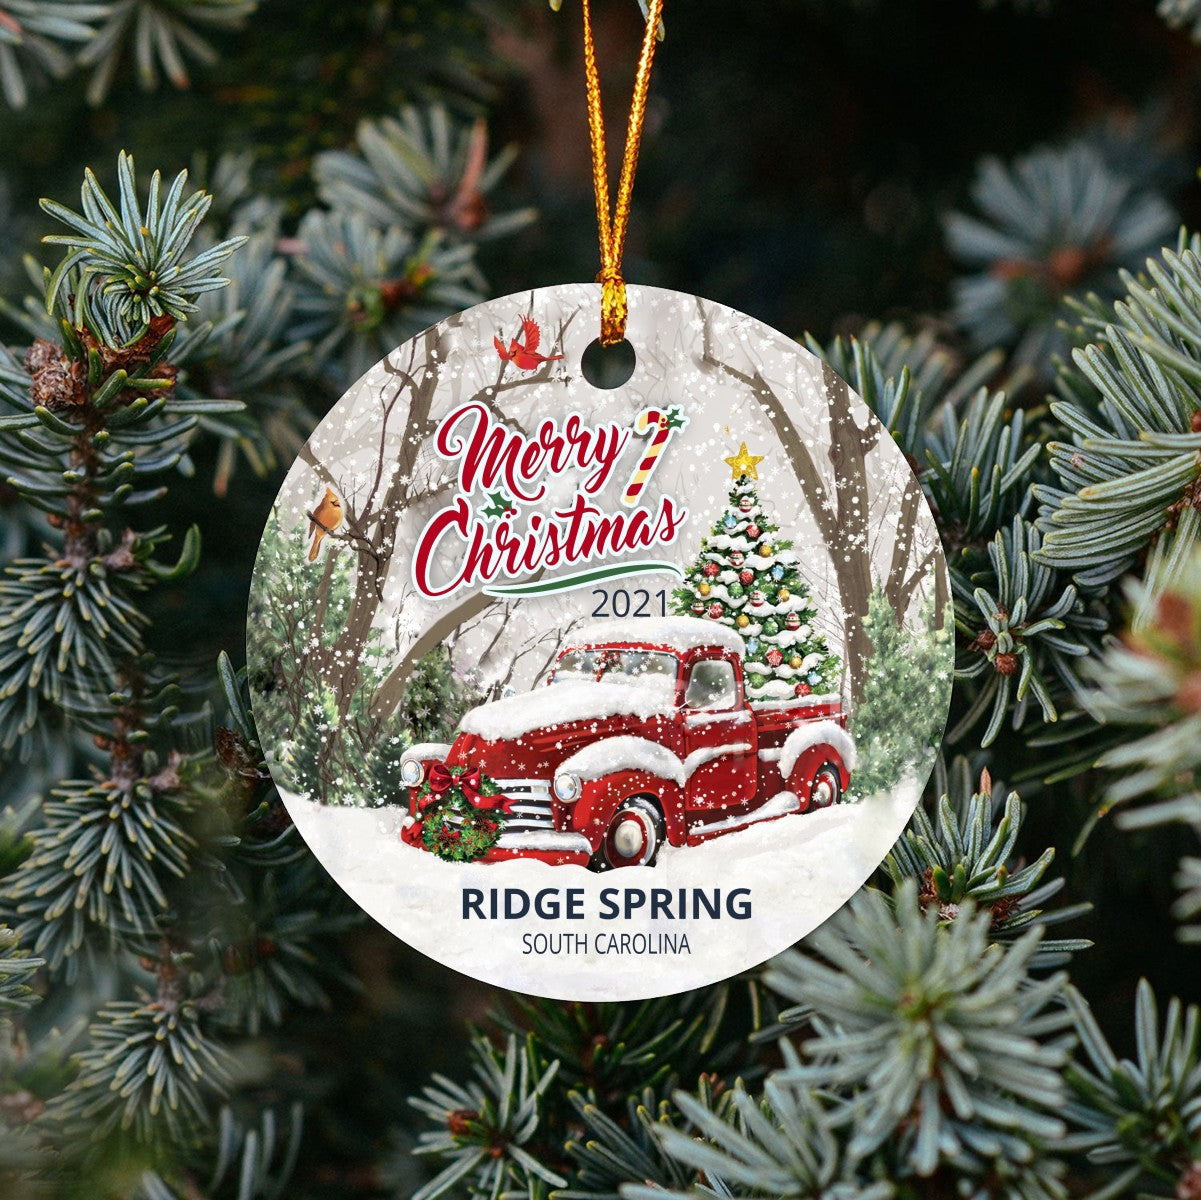 Christmas Tree Ornaments Ridge Spring - Ornament With Name City, State Ridge Spring South Carolina SC Ornament - Red Truck Xmas Ornaments 3'' Plastic Gift For Family, Friend And Housewarming